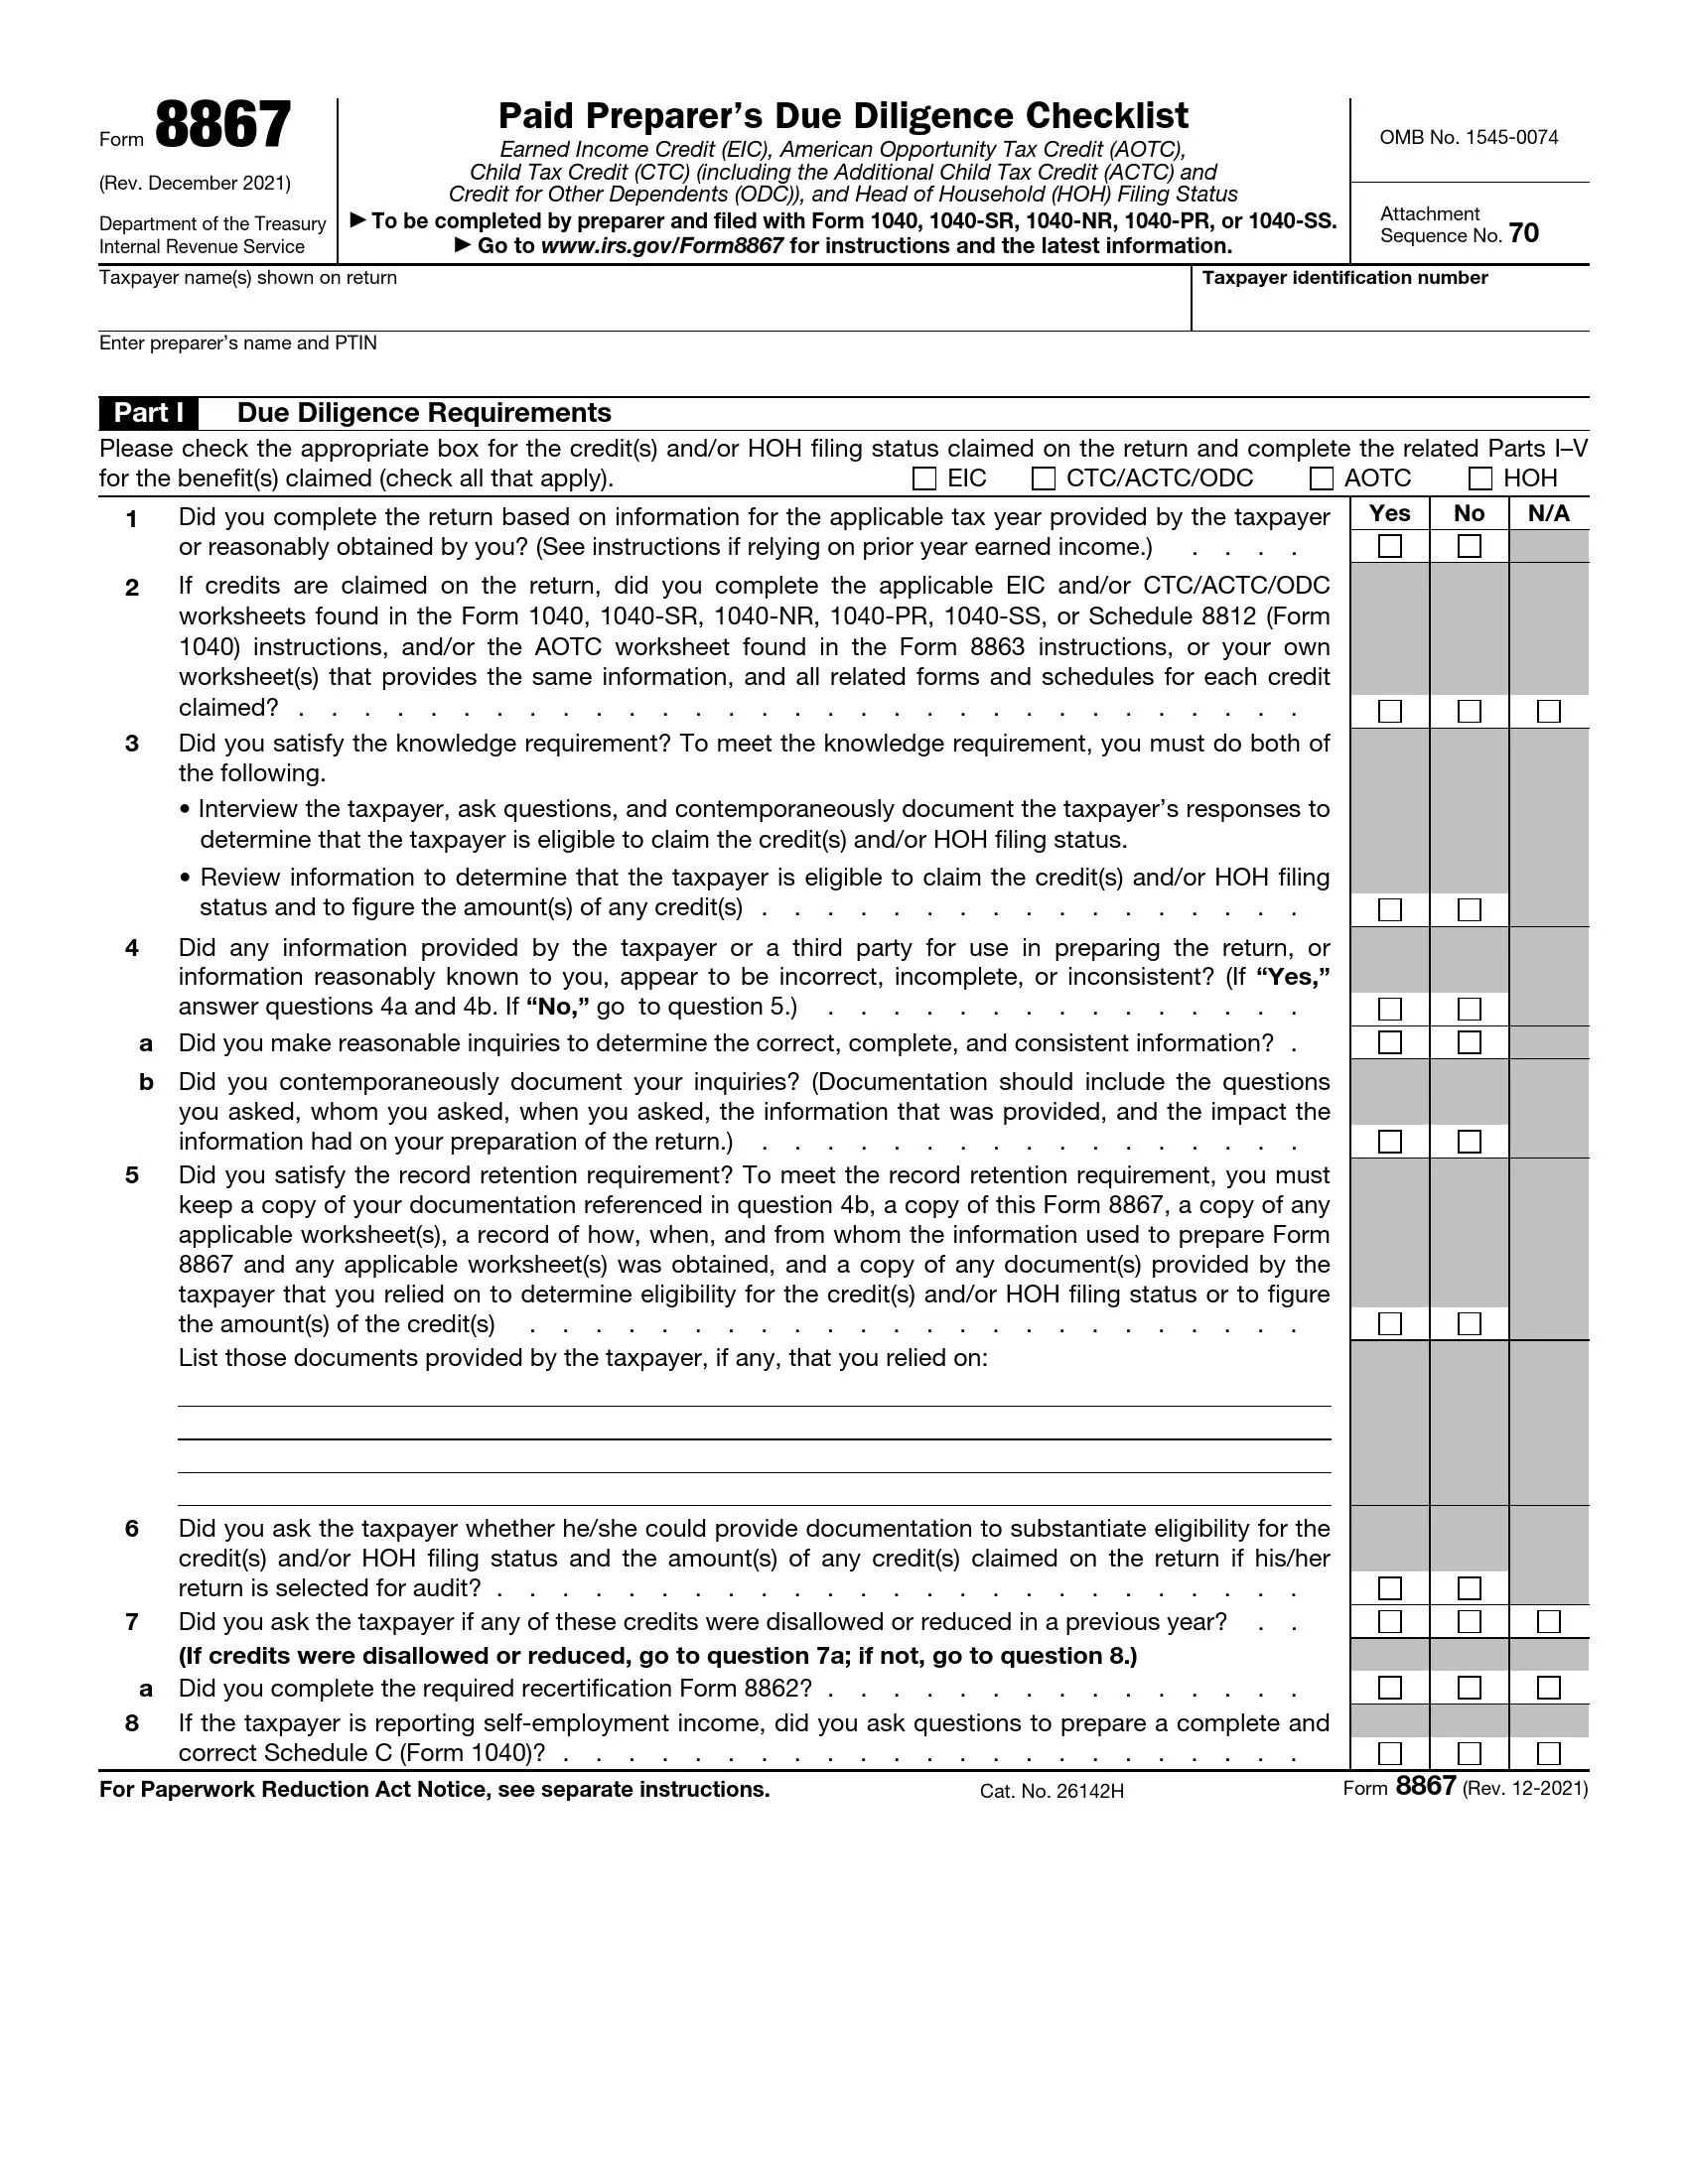 irs form 8867 rev 12 2021 preview